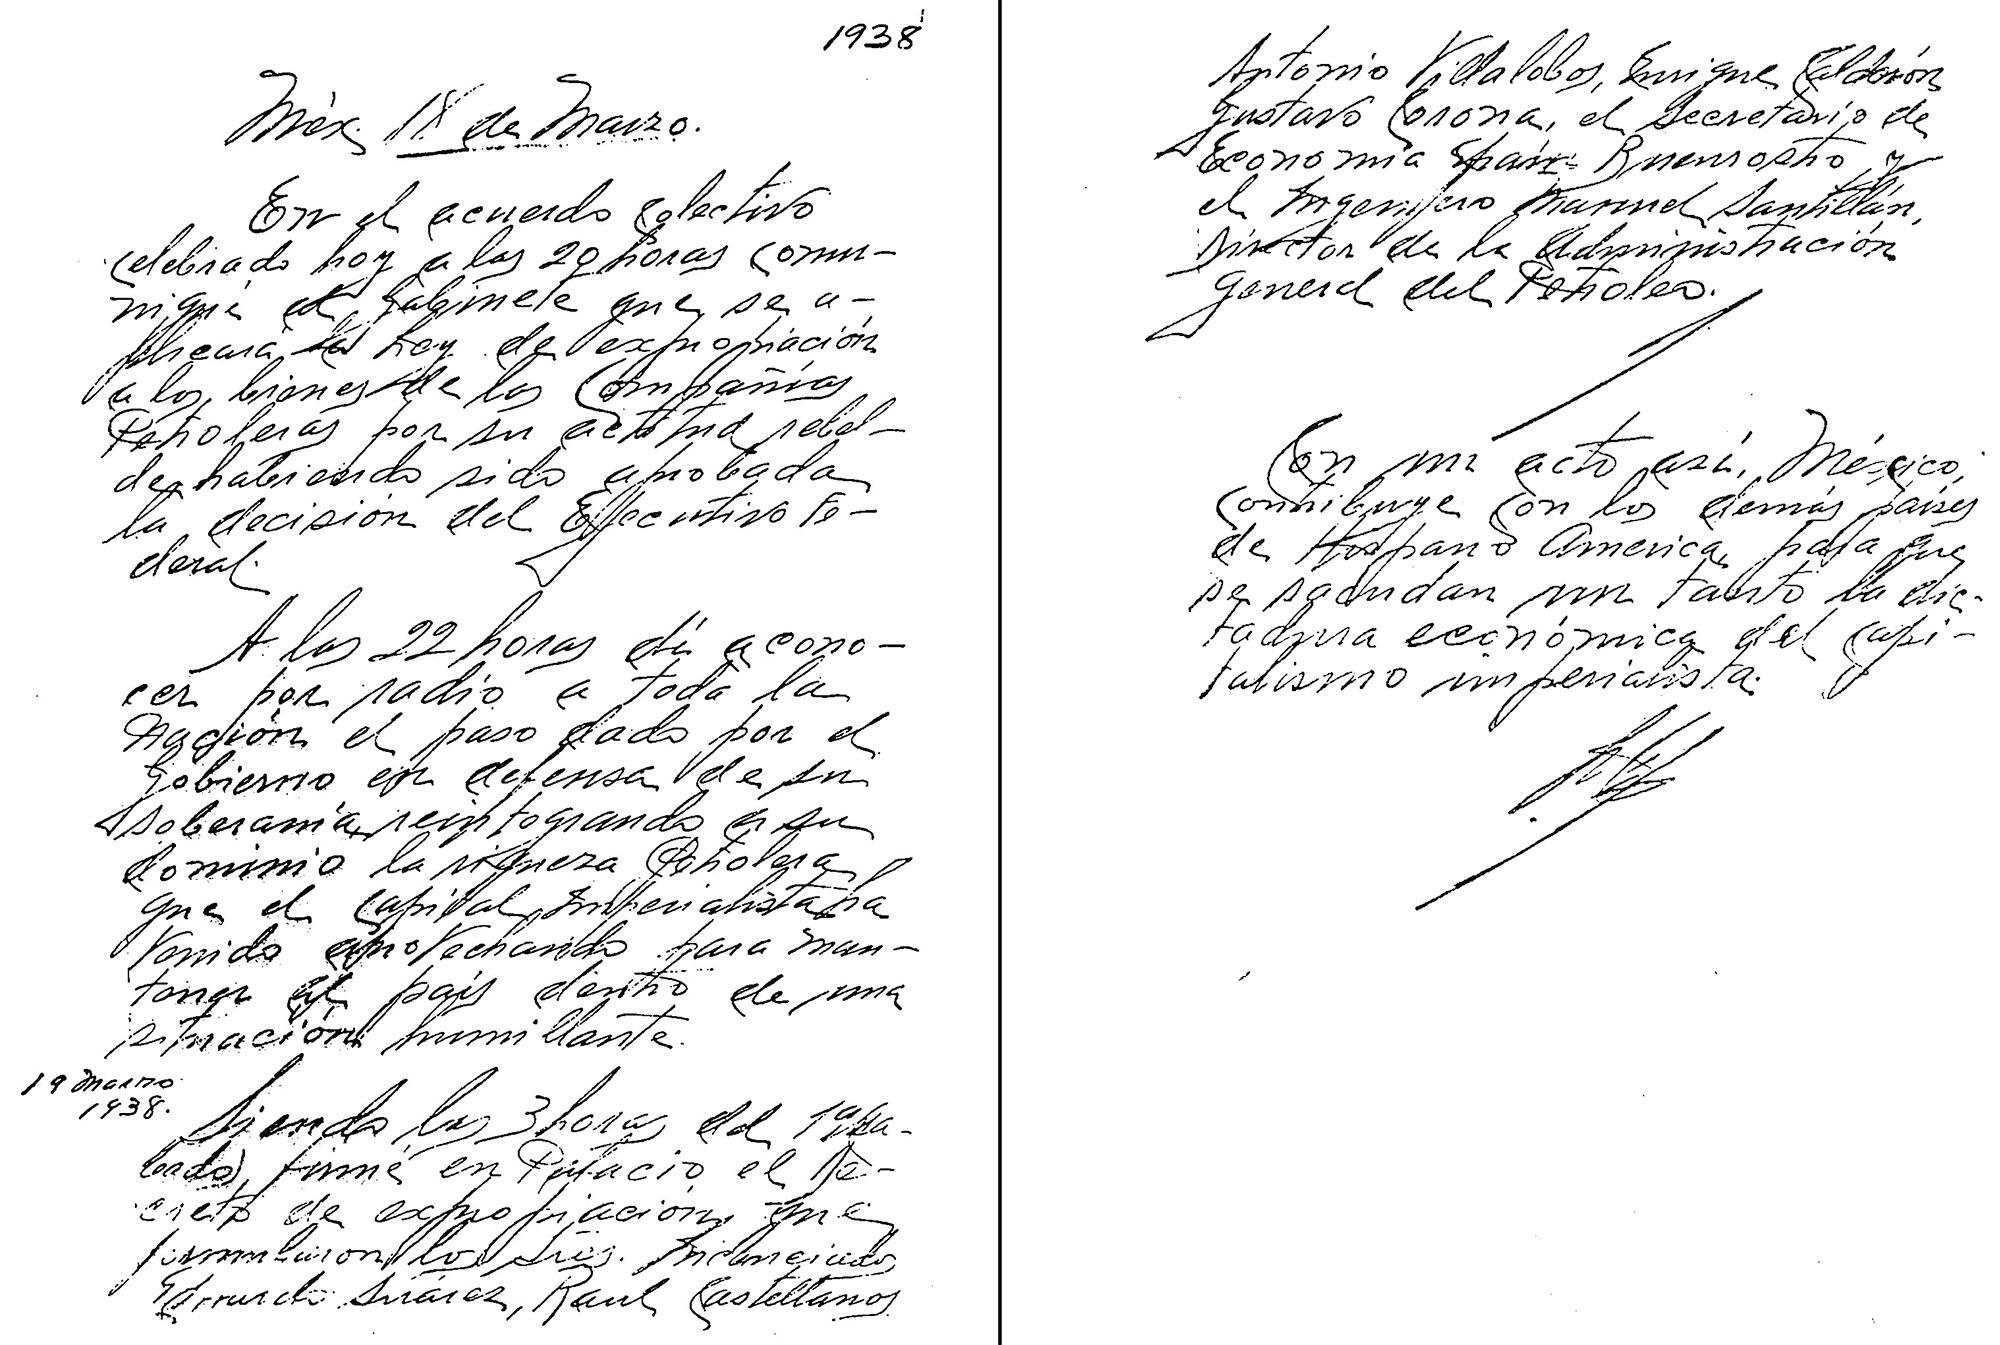 The March 18, 1938, diary entry of President Lázaro Cárdenas, which records the nationalization of the oil industry. (Image courtesy of Cuauhtémoc Cárdenas.)